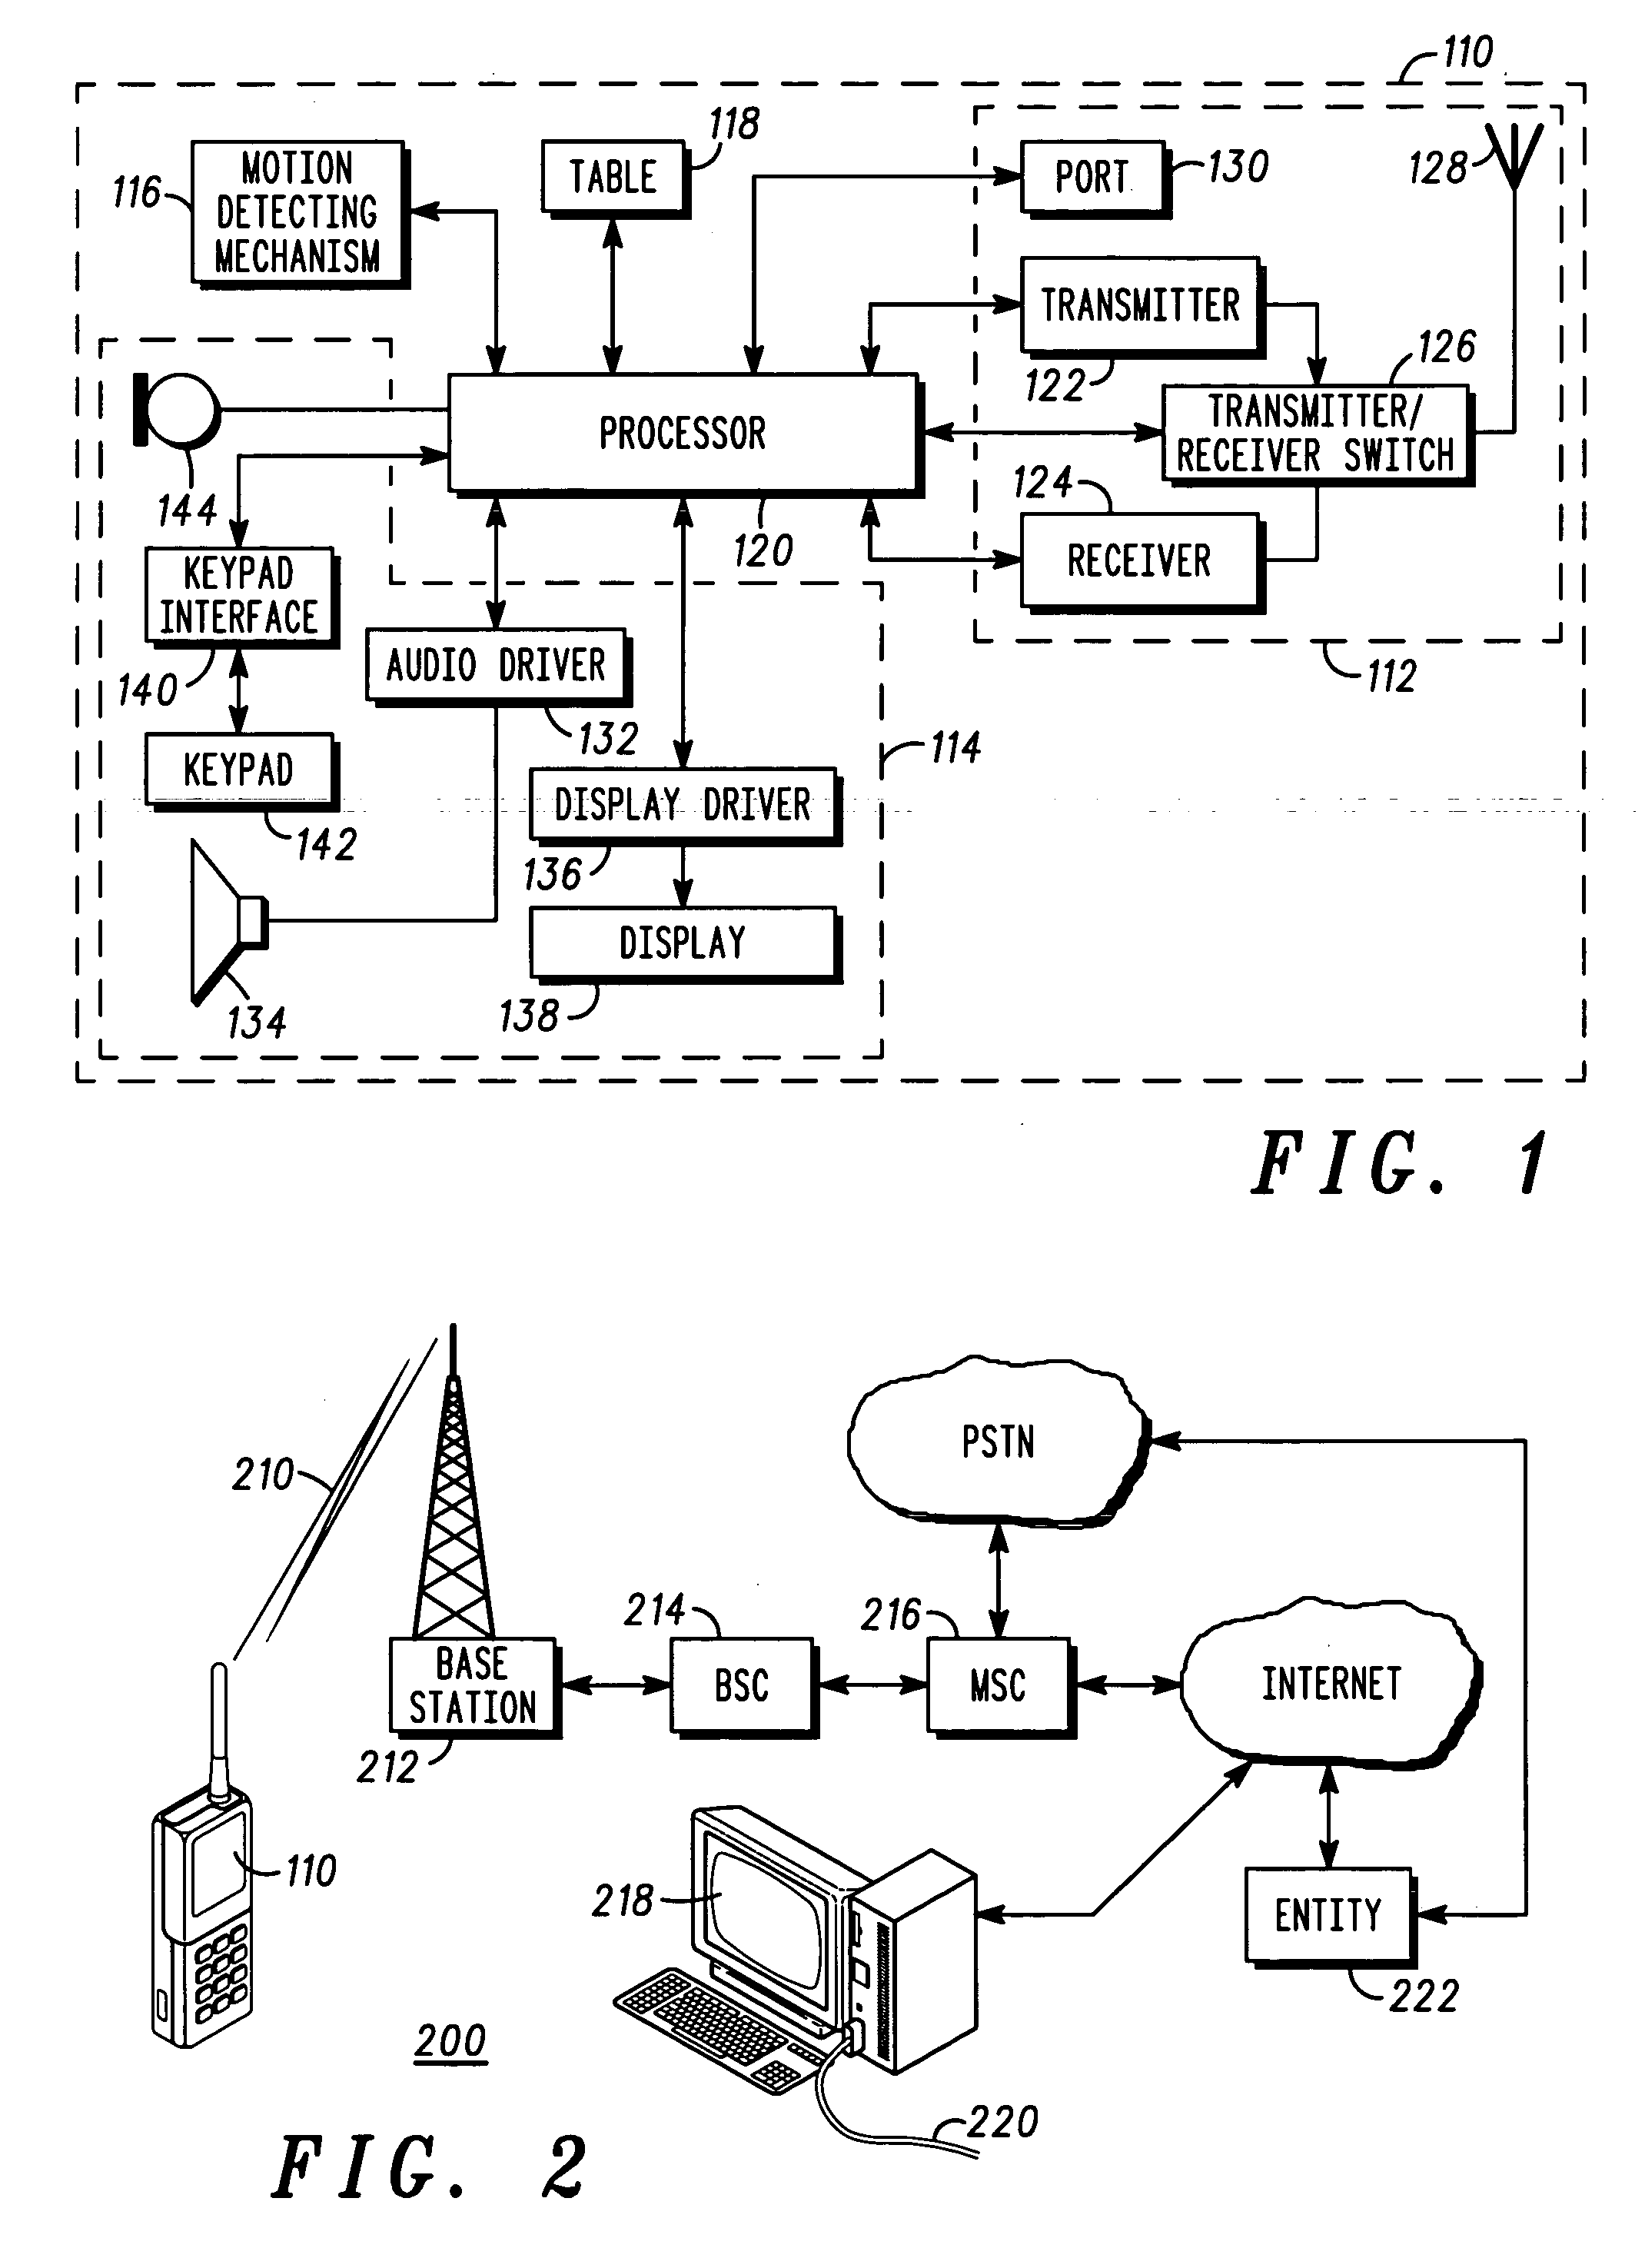 Method and system for electronically generating random answers